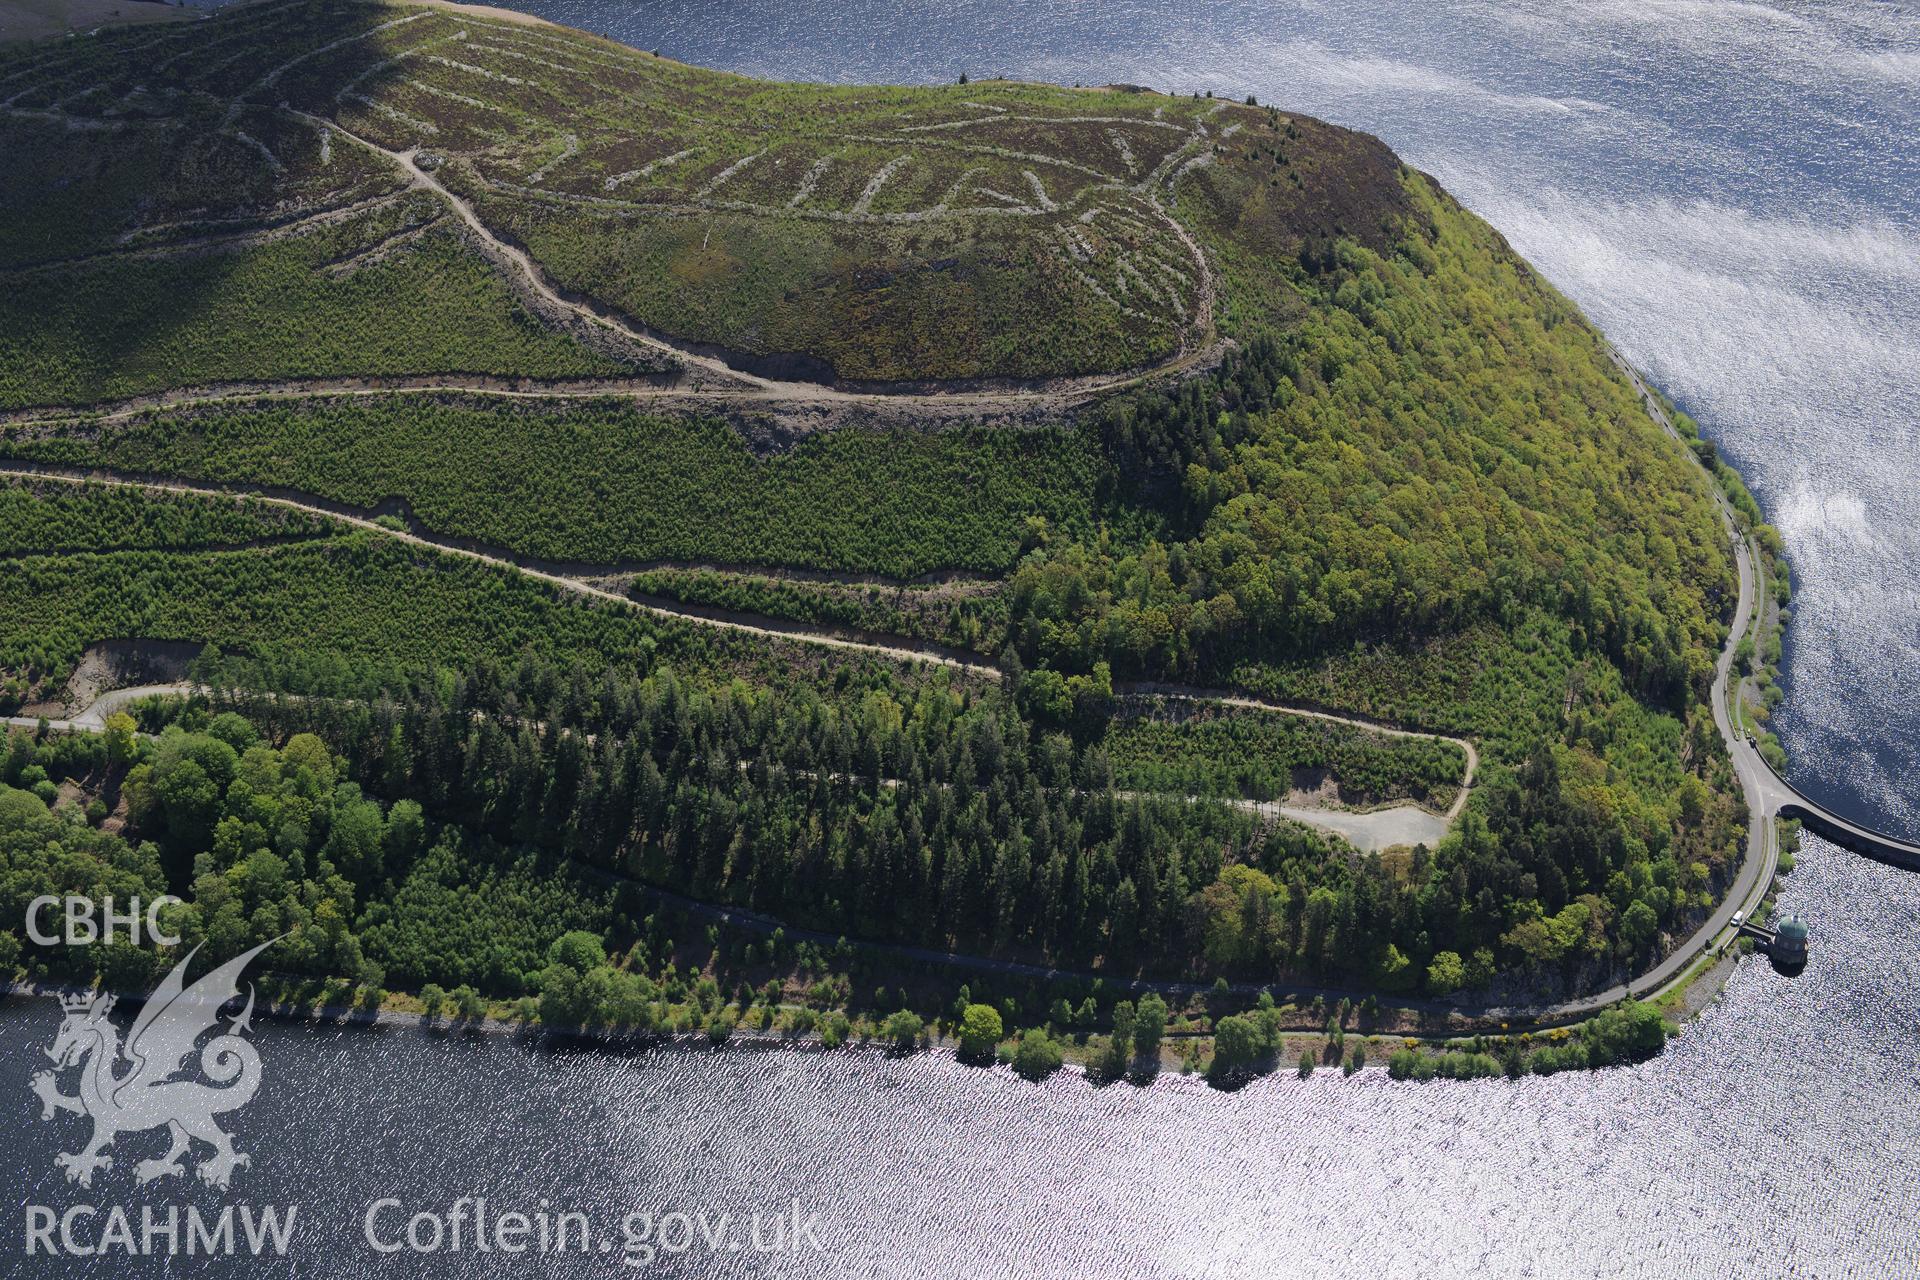 Garreg-Ddu dam, valve and reservoir and Coed-y-Foel pill boxes at the Elan Valley water scheme. Oblique aerial photograph taken during the Royal Commission's programme of archaeological aerial reconnaissance by Toby Driver on 3rd June 2015.